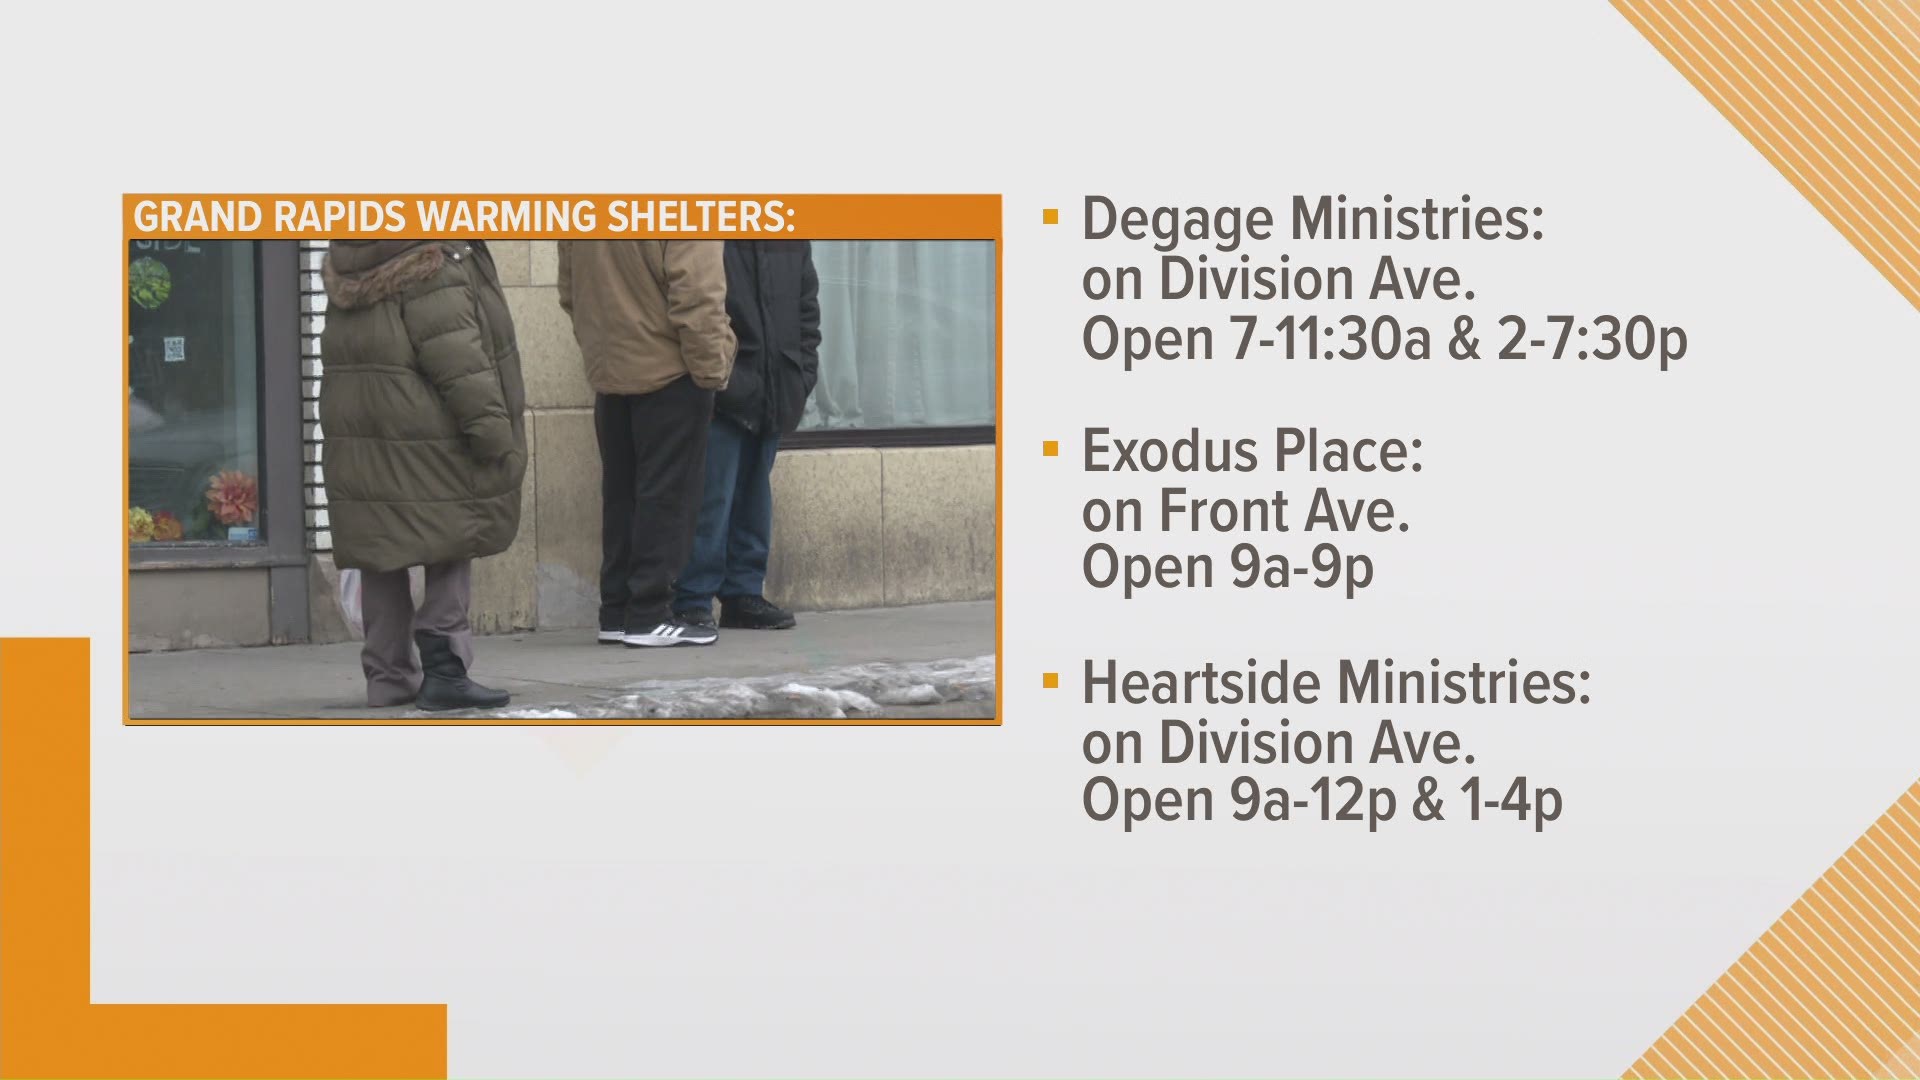 Several warming shelters have opened in the Grand Rapids area ahead of a winter storm headed for the region and a blast of cold air.